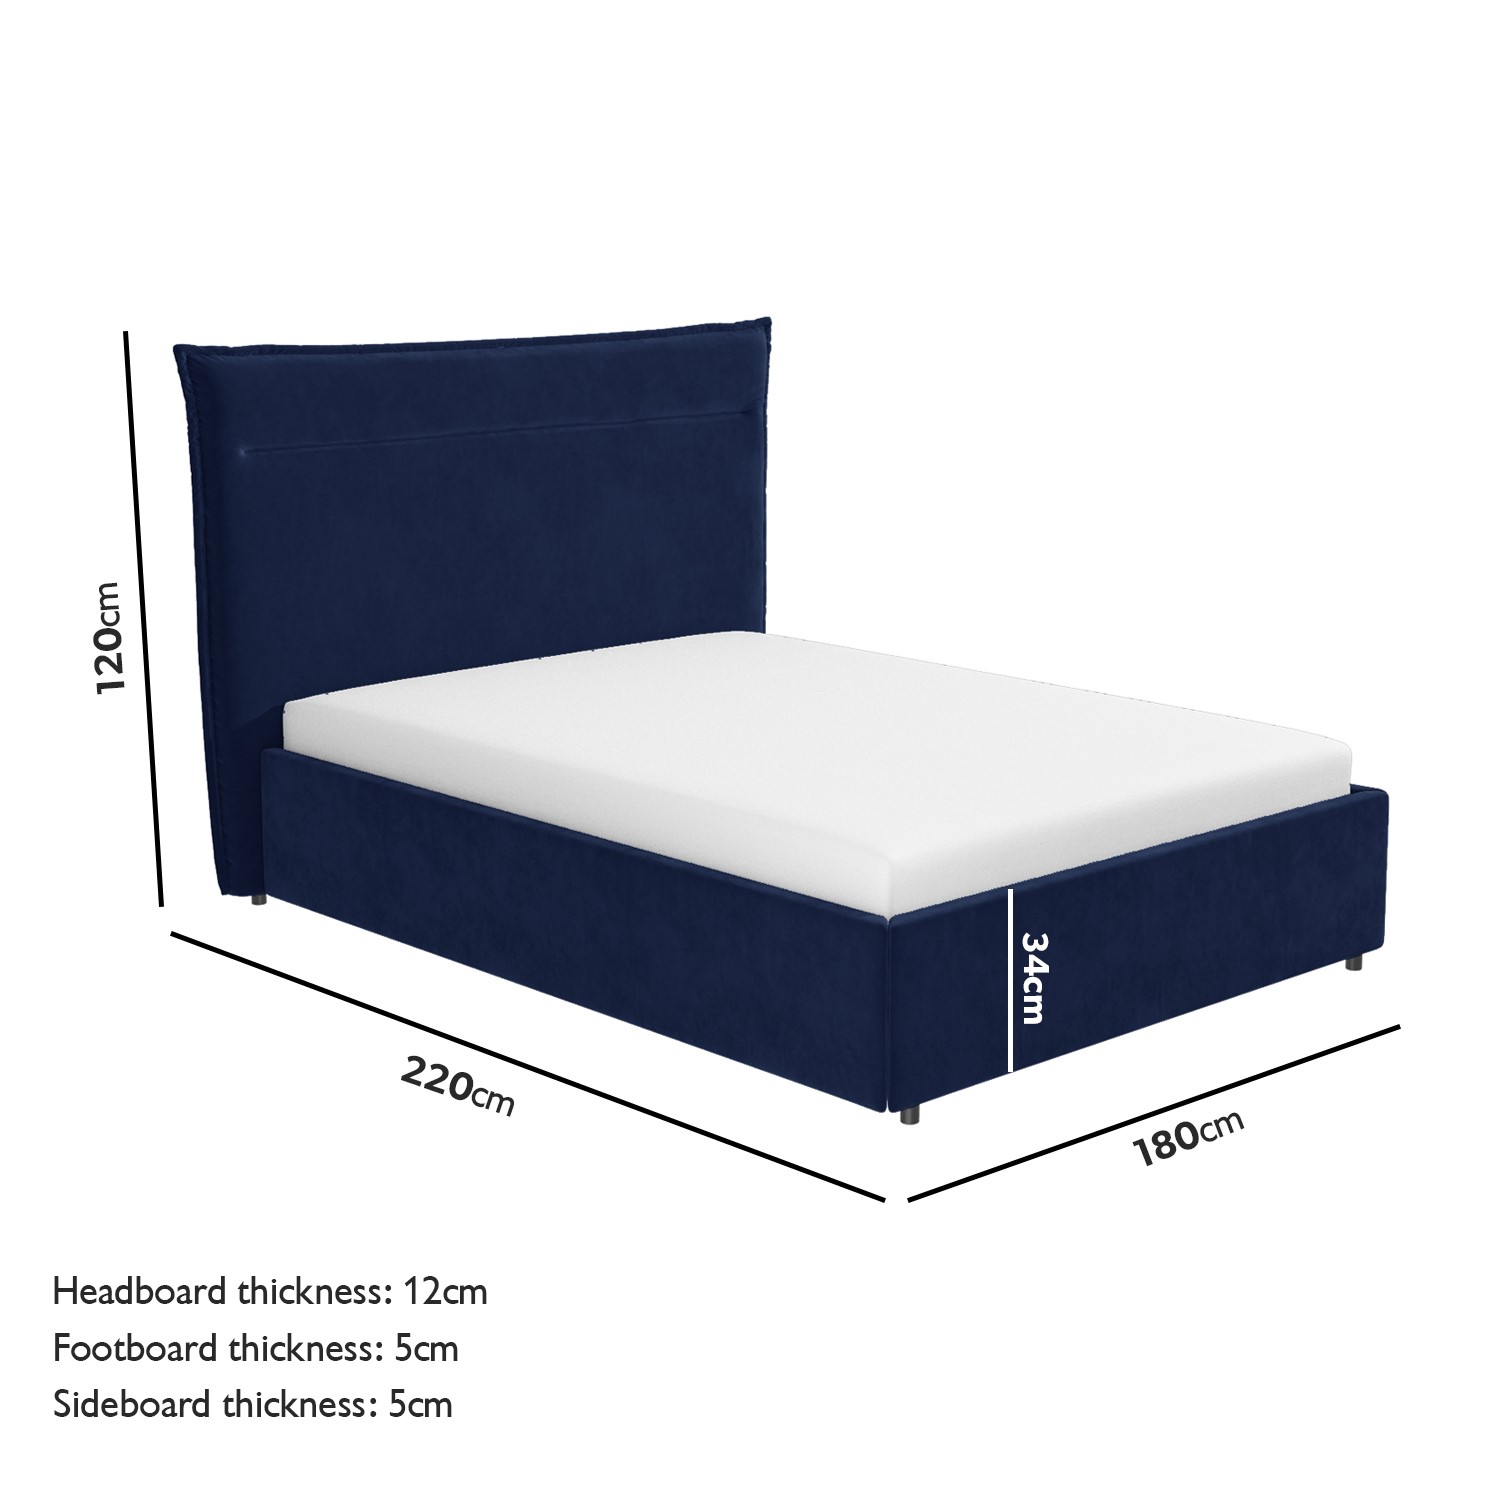 Read more about Navy blue velvet king size bed frame with cushioned headboard maddox